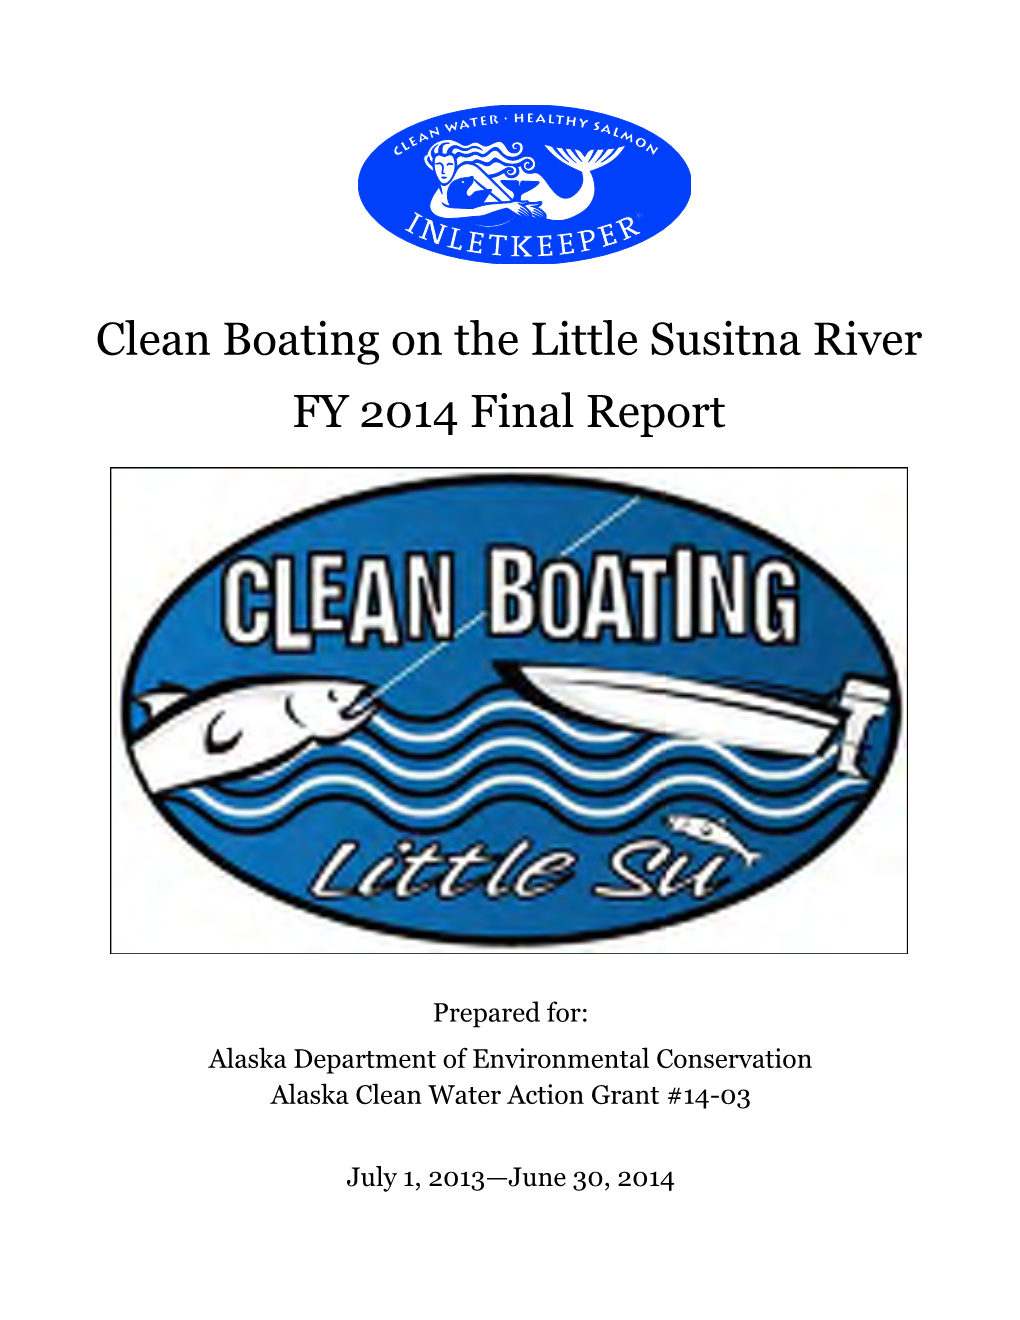 Clean Boating on the Little Susitna River FY 2014 Final Report